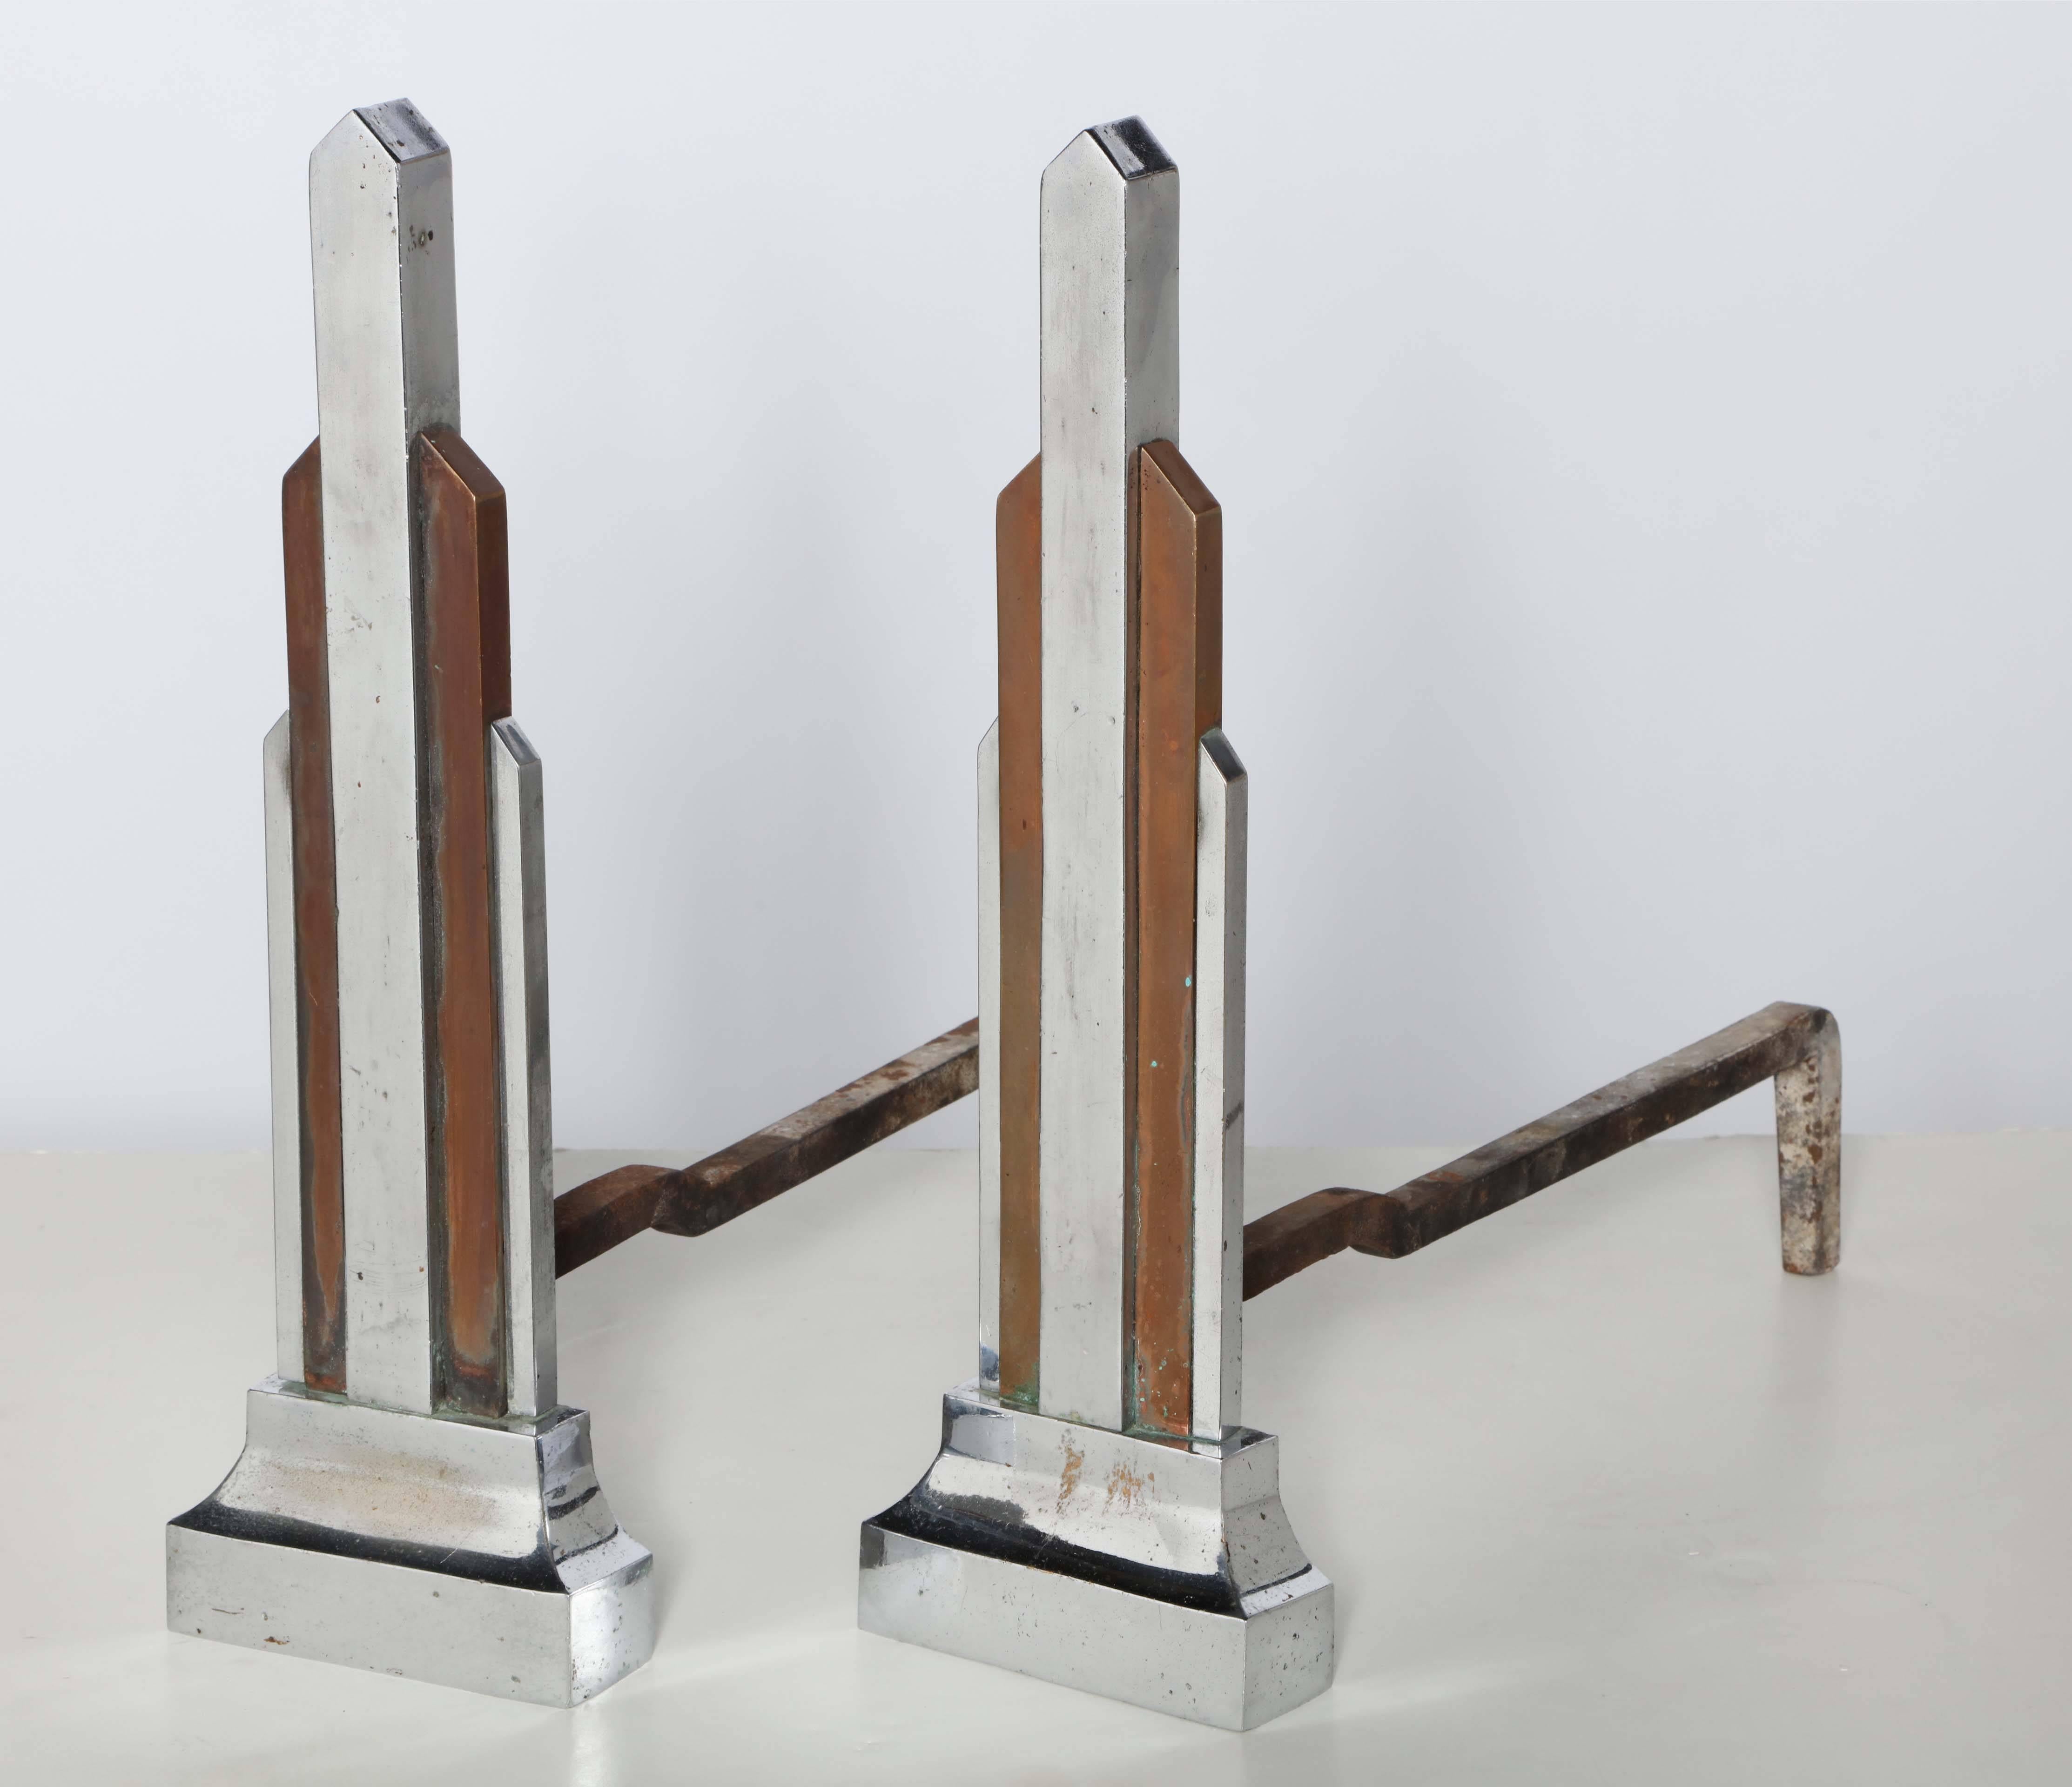 Late 1920s Chrome-Plated Iron and Brass Skyscraper Andirons. Classic American Art Deco design with Cast Iron firedog legs. Architectural front in Chrome-plated Iron and Brass.